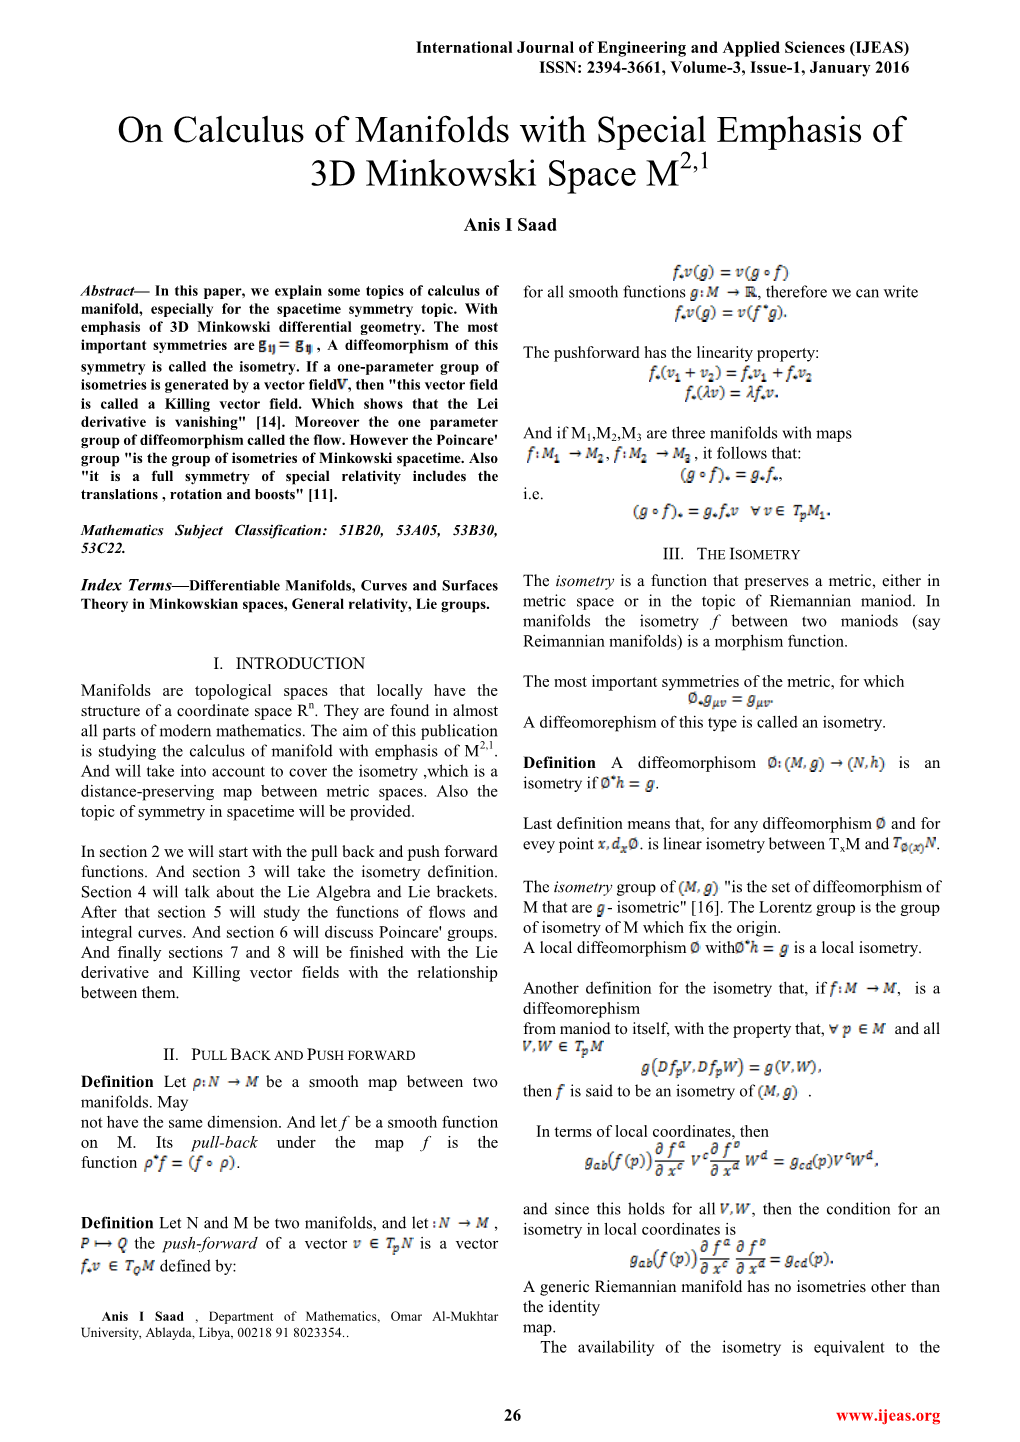 On Calculus of Manifolds with Special Emphasis of 3D Minkowski Space M2,1